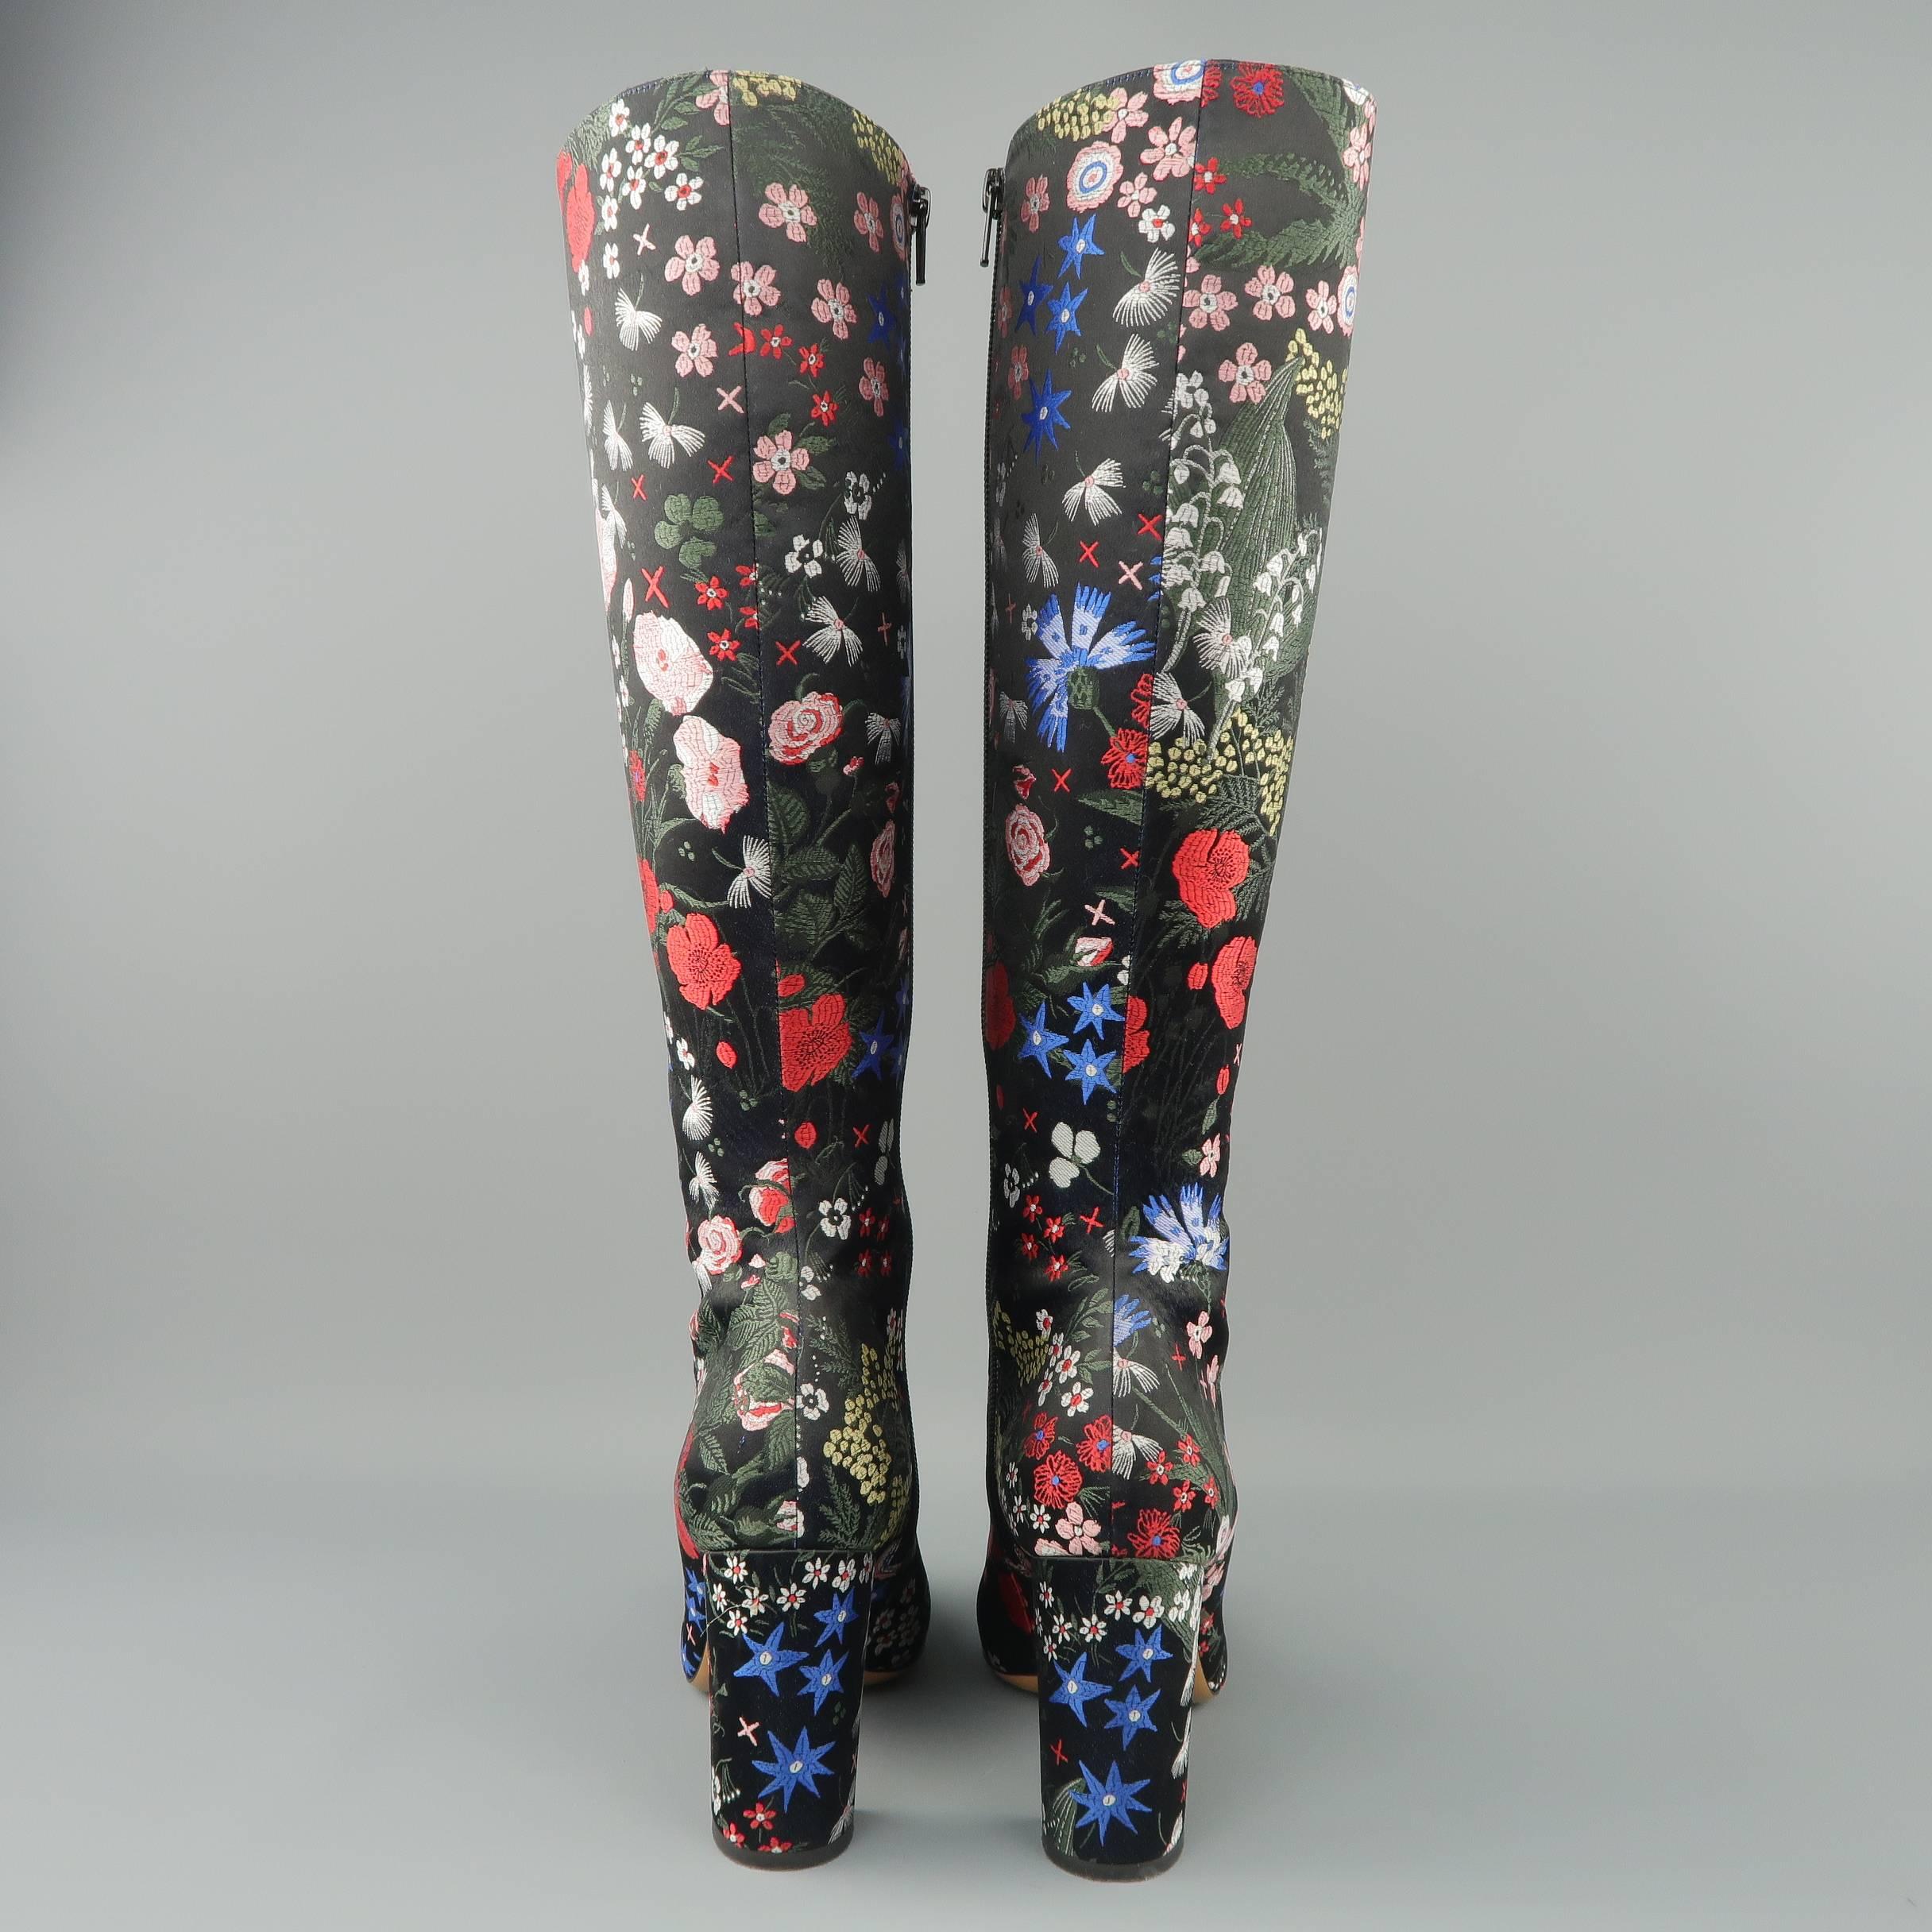 Valentino Boots - Pre-Fall 2015 Runway - Black MultiColor Floral Satin Knee High 3